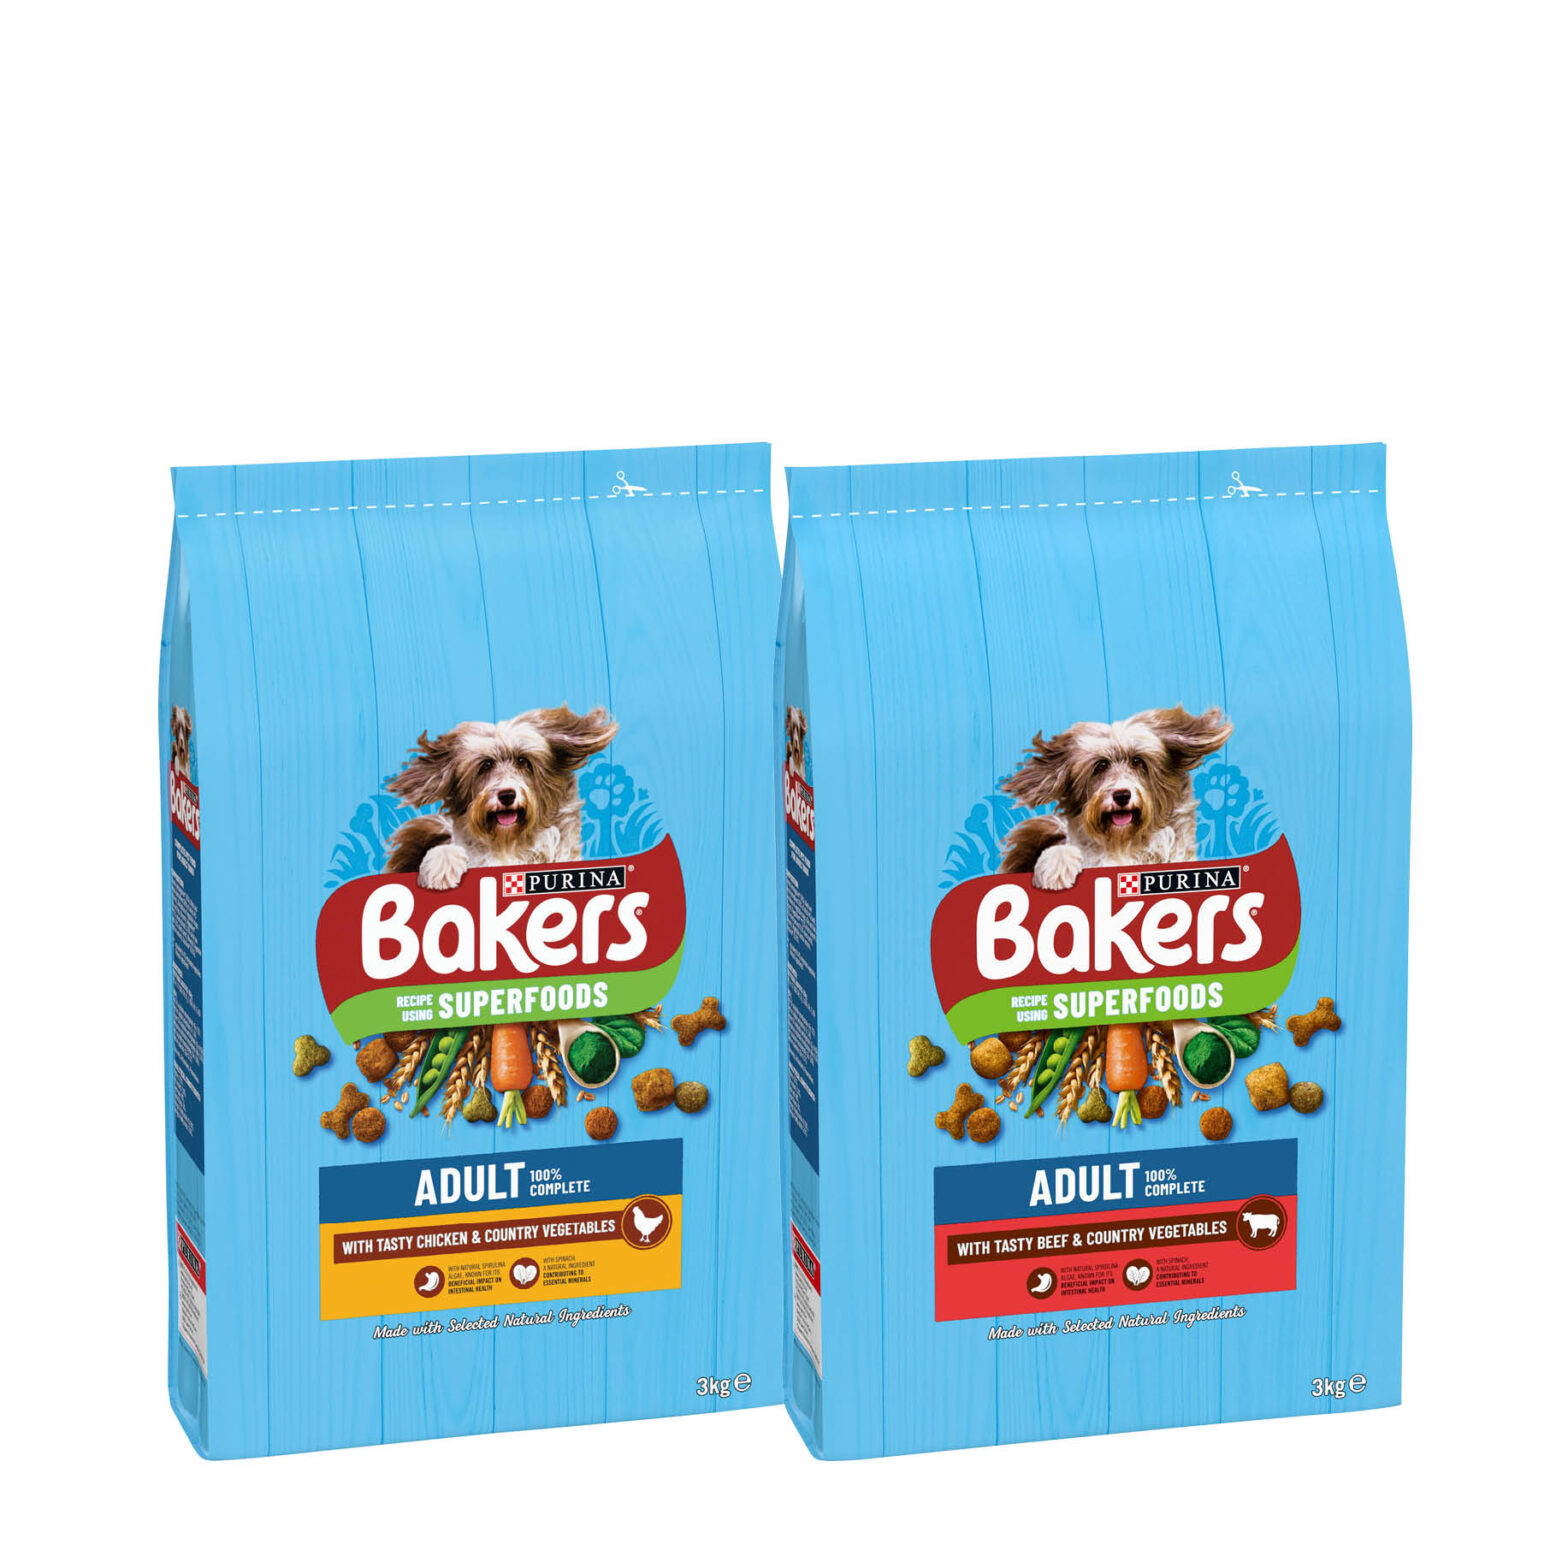 Bakers Adult Chicken with Vegetables Dry Dog Food / Bakers Adult Beef with Vegetables Dry Dog Food